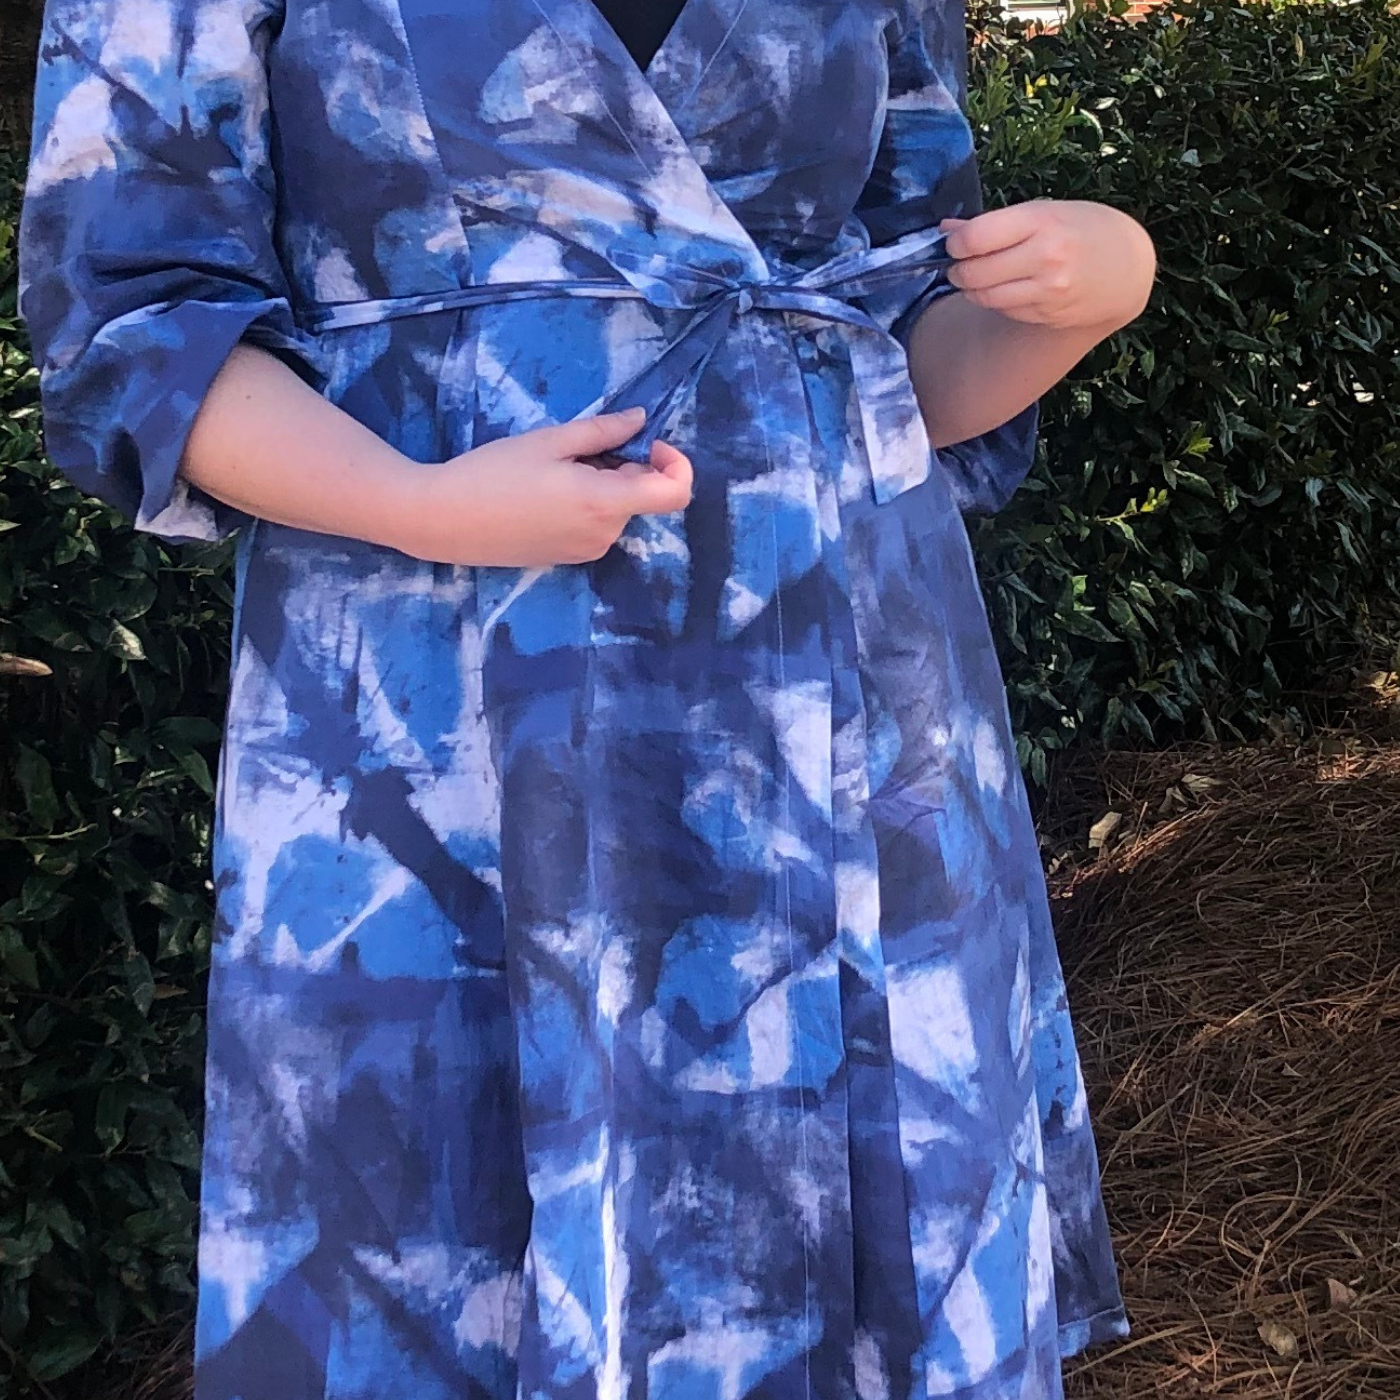 A close up of the midsection of the blue wrap dress Kelley is wearing with an indigo shibori design. Her hands are by the fabric bow tie at the waist which closes the dress.